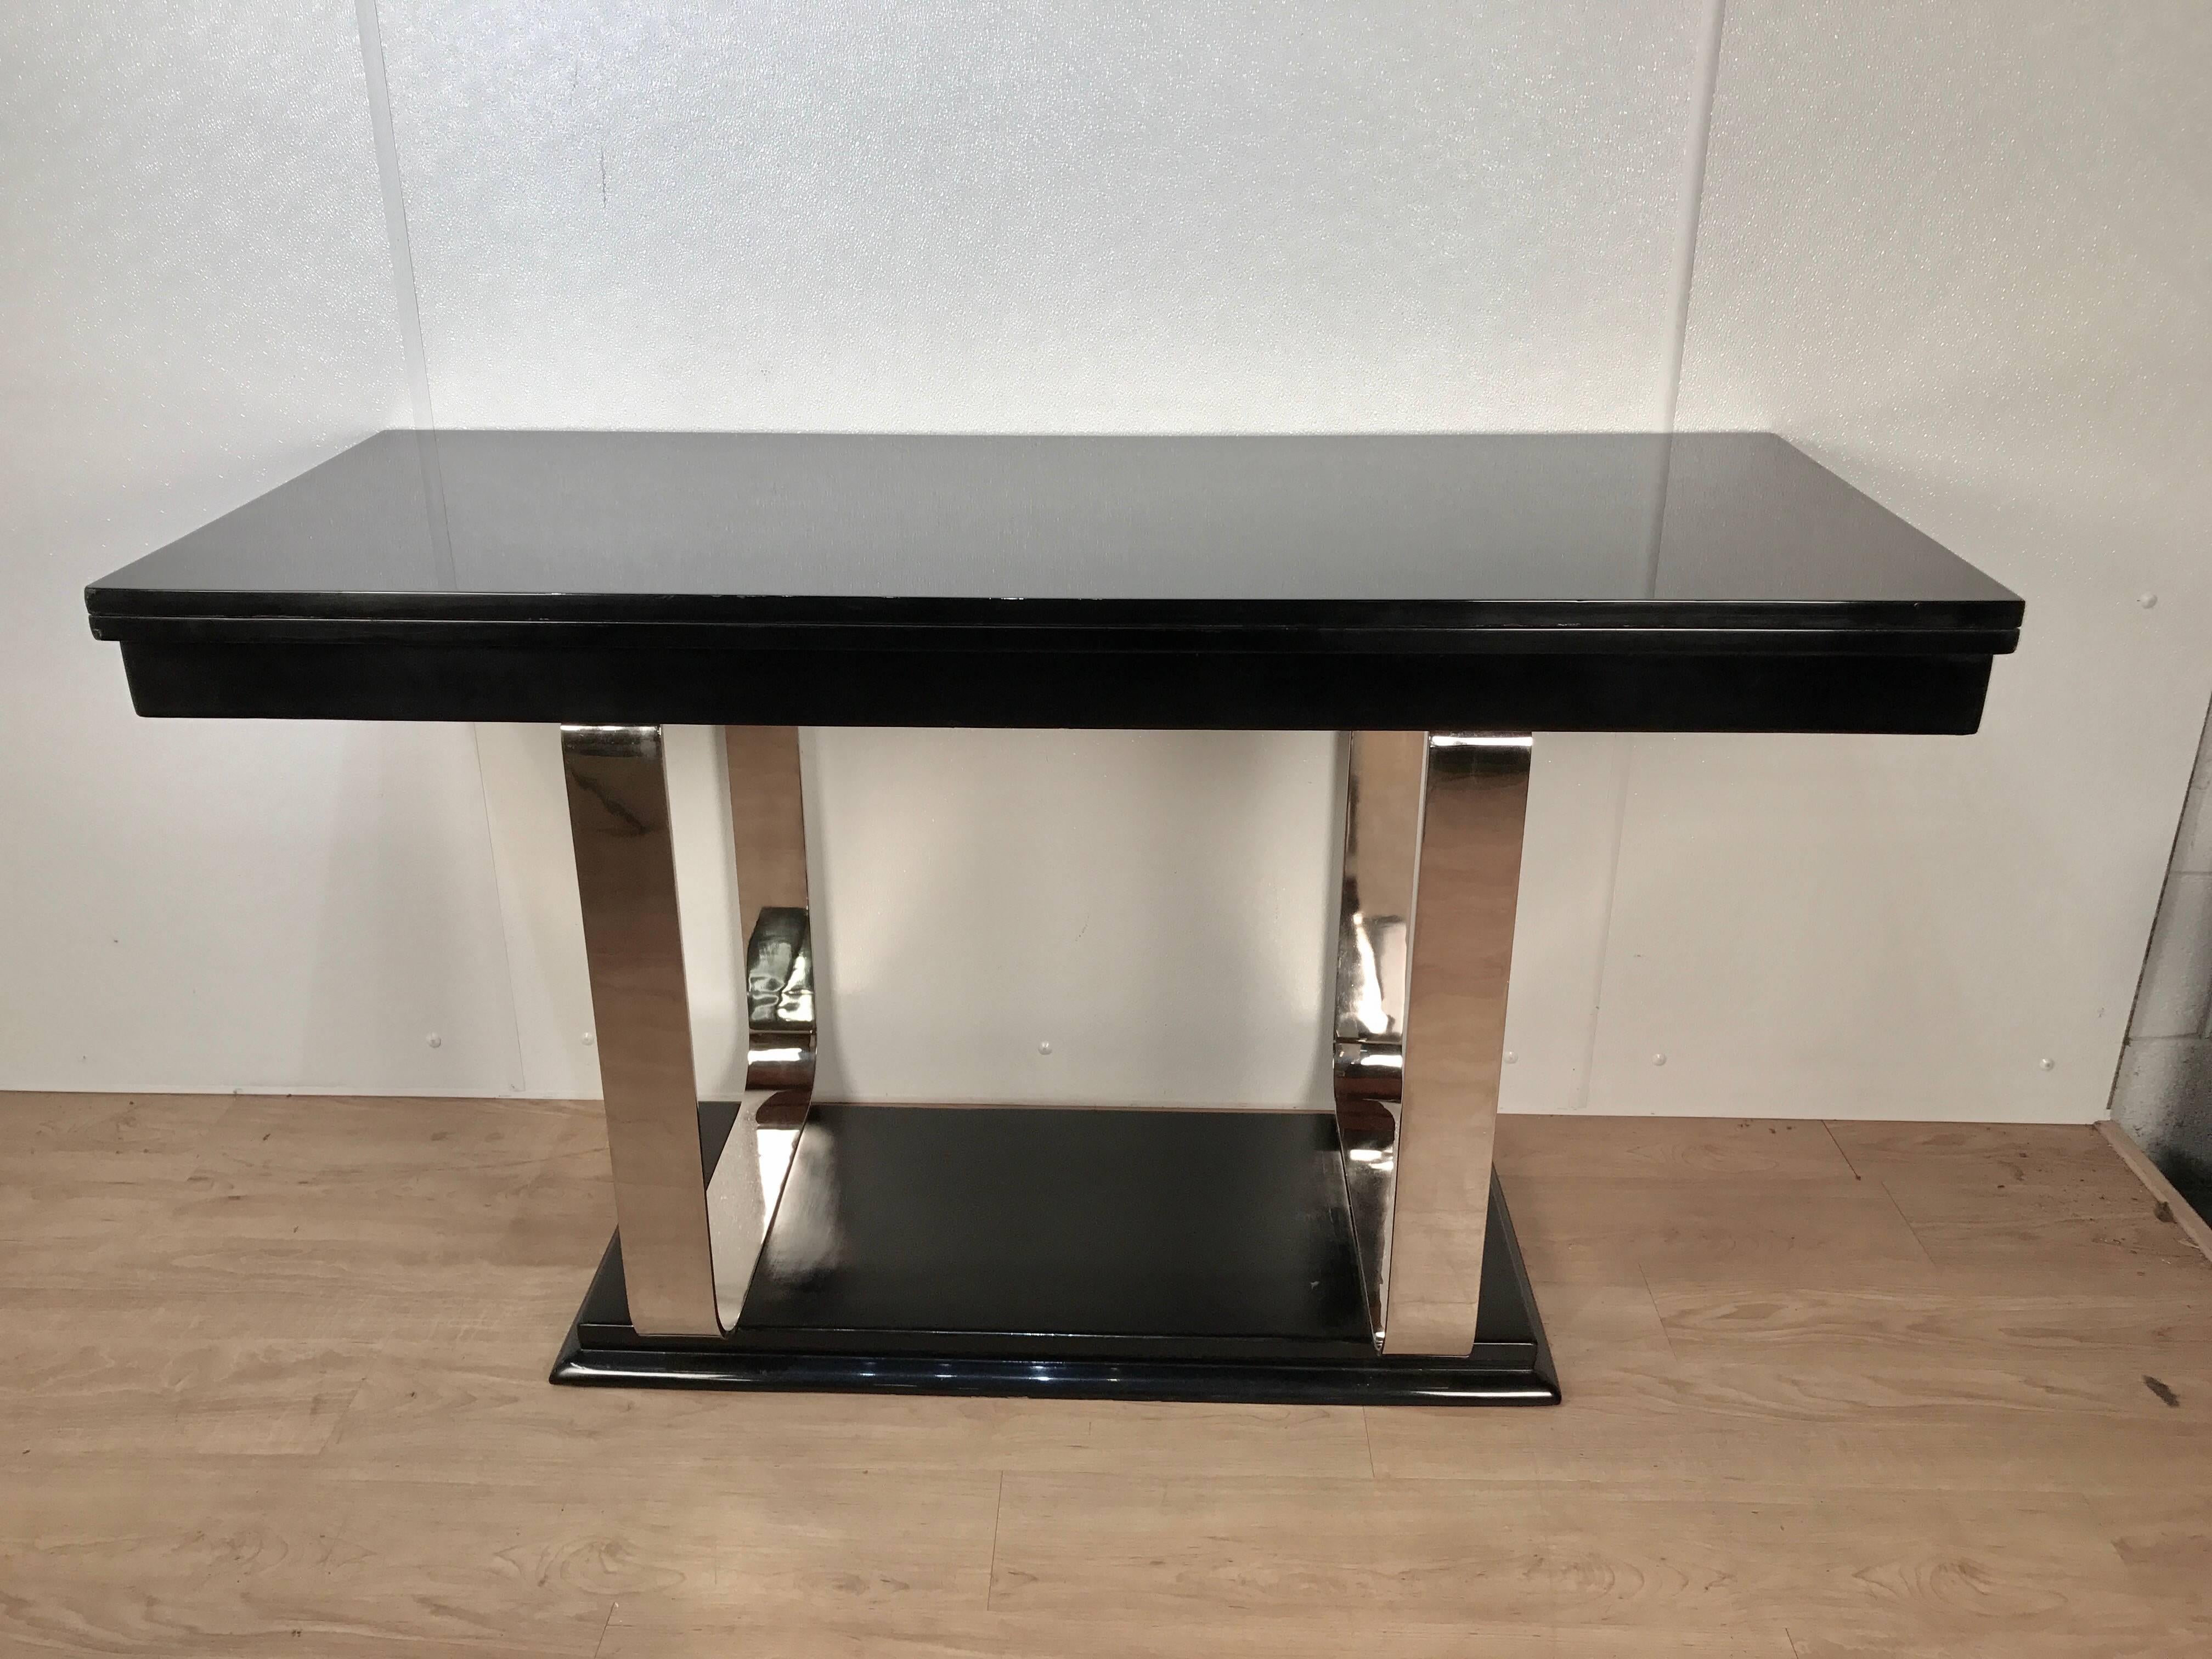 Art Deco lacquer and chrome console or dining table, exquisite versatile table perfect for small spaces, dual function serves as a streamlined console table, with a flip-top revealing a 64